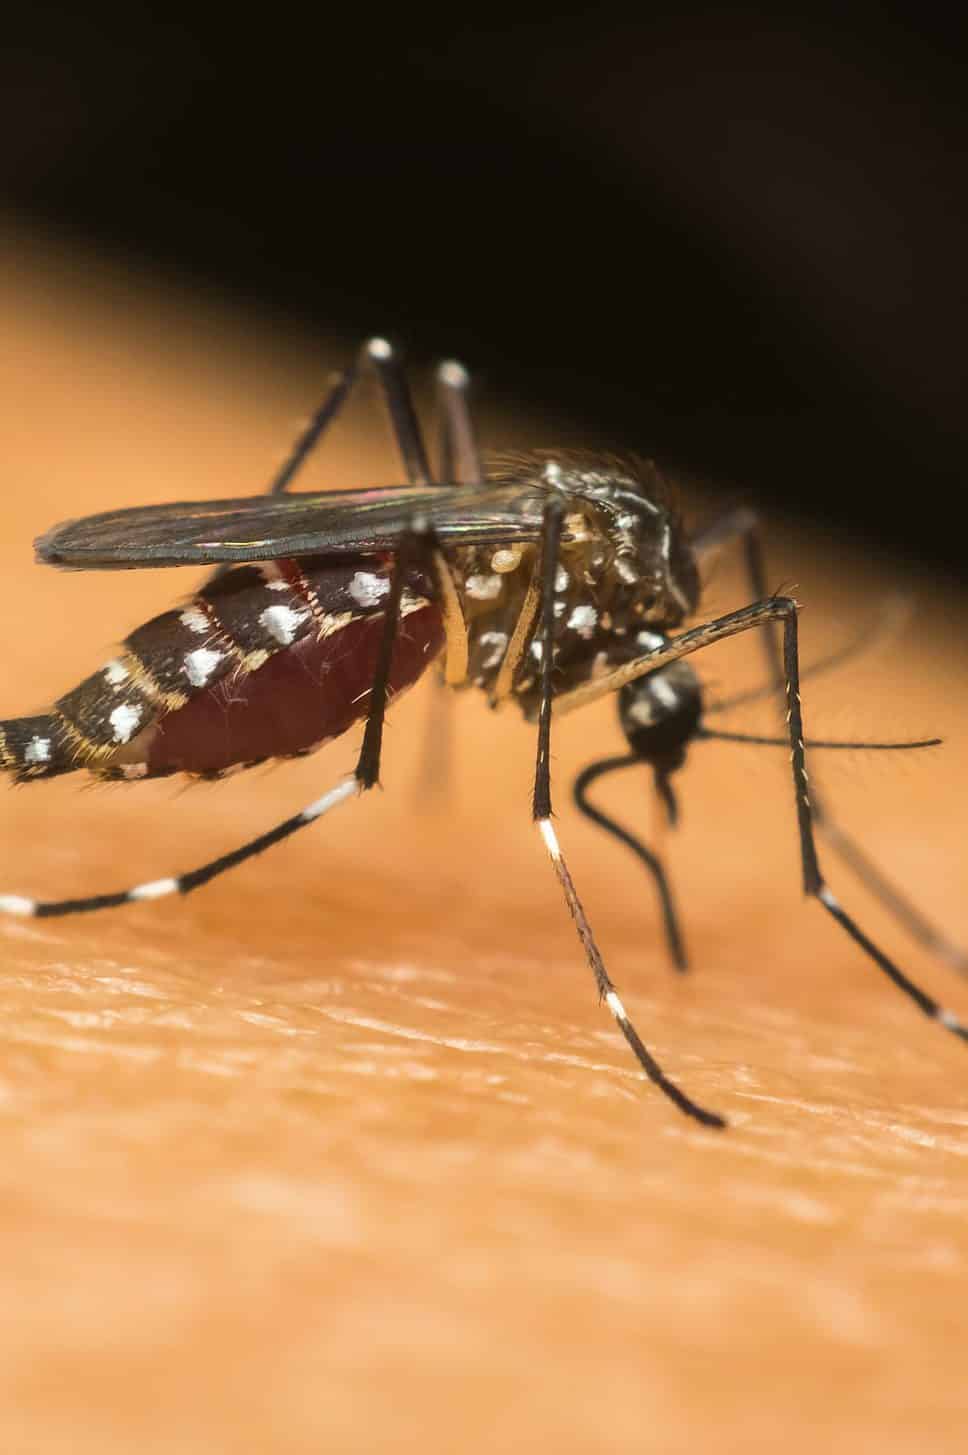 Tropical mosquito Aedes aegypti prevalent in thailand